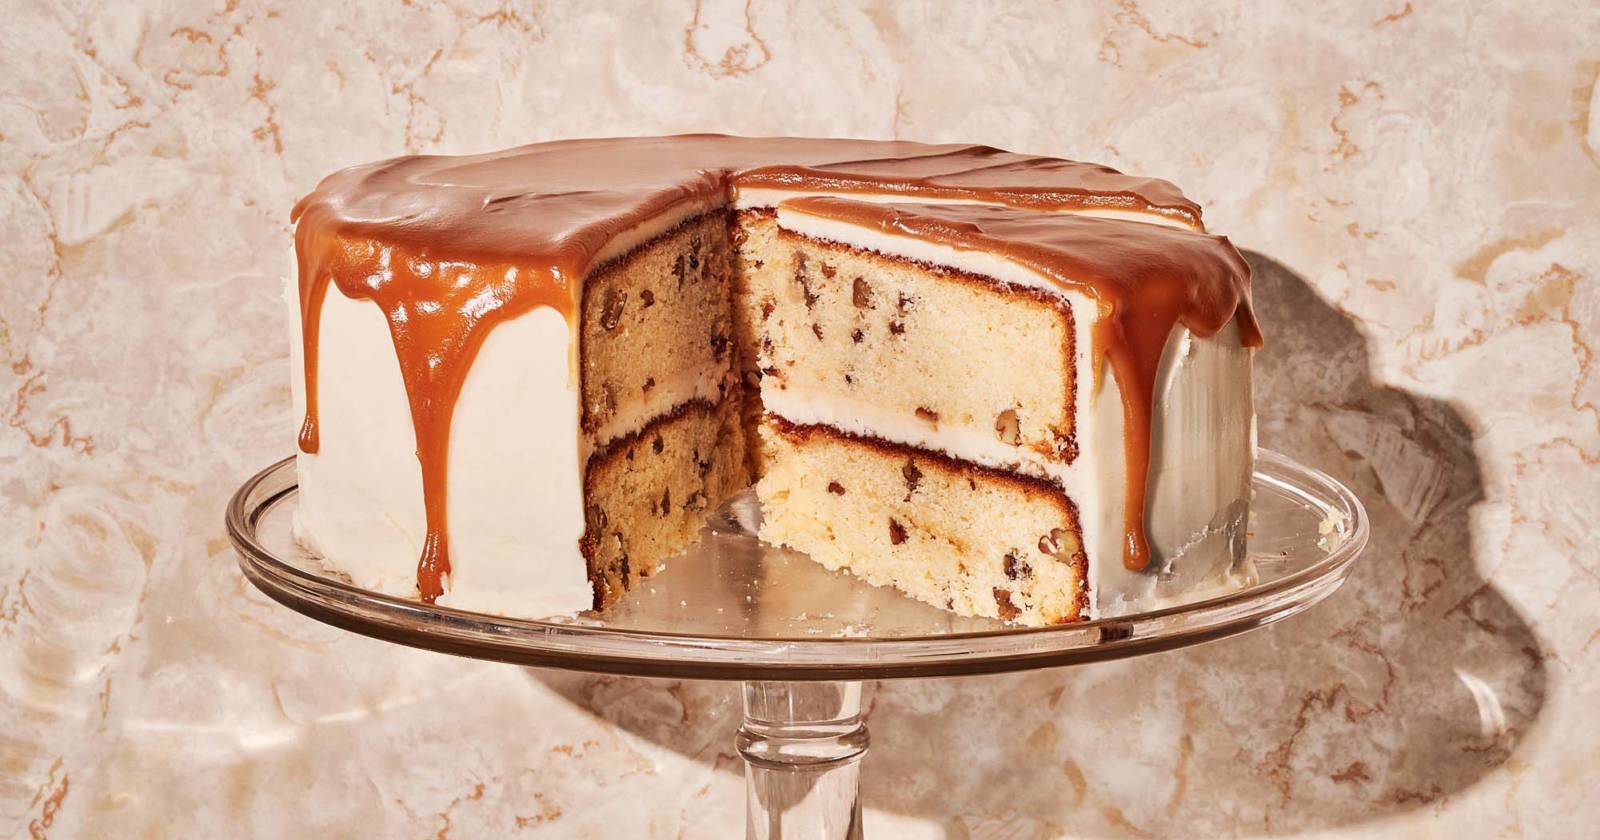 Is This Caramel Cake with Pecans the Perfect Southern Dessert?